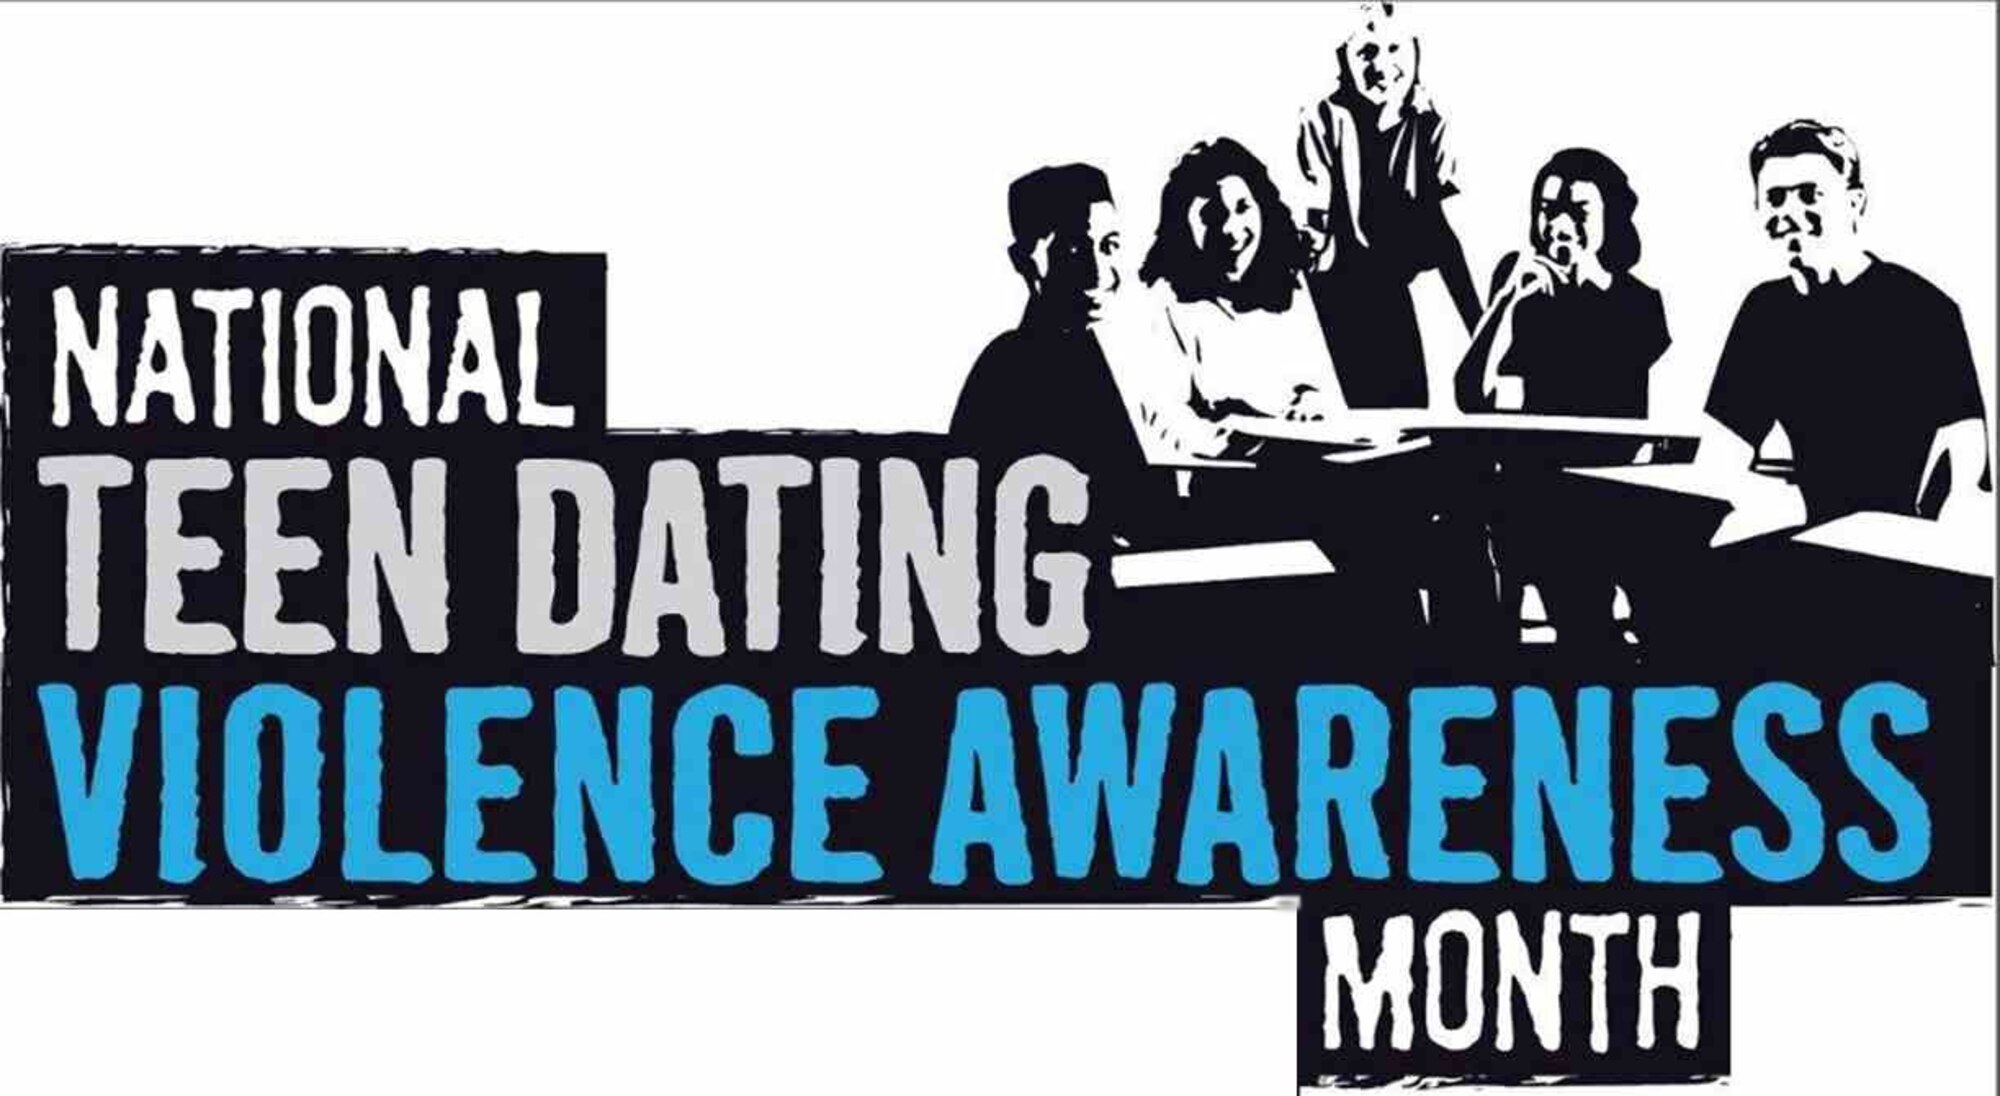 National Teen Dating Violence Awareness Month graphic